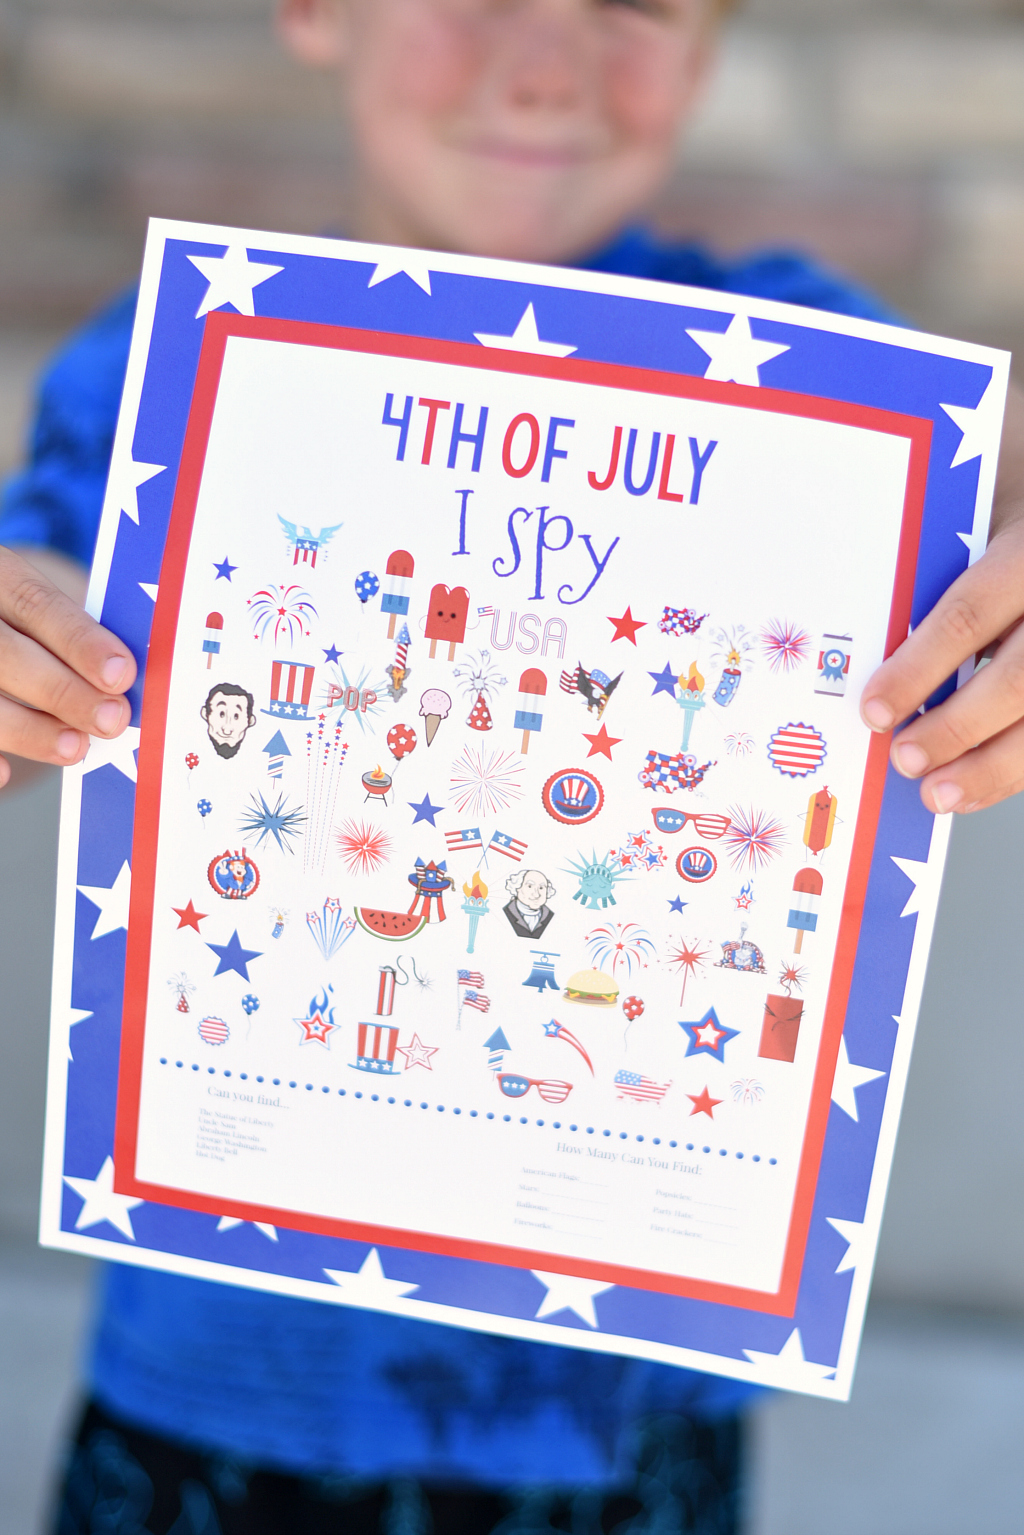 Patriotic themed kids crafts, games, printables, recipes, and activities. Fun 4th of July ideas. America themed activities and crafts.